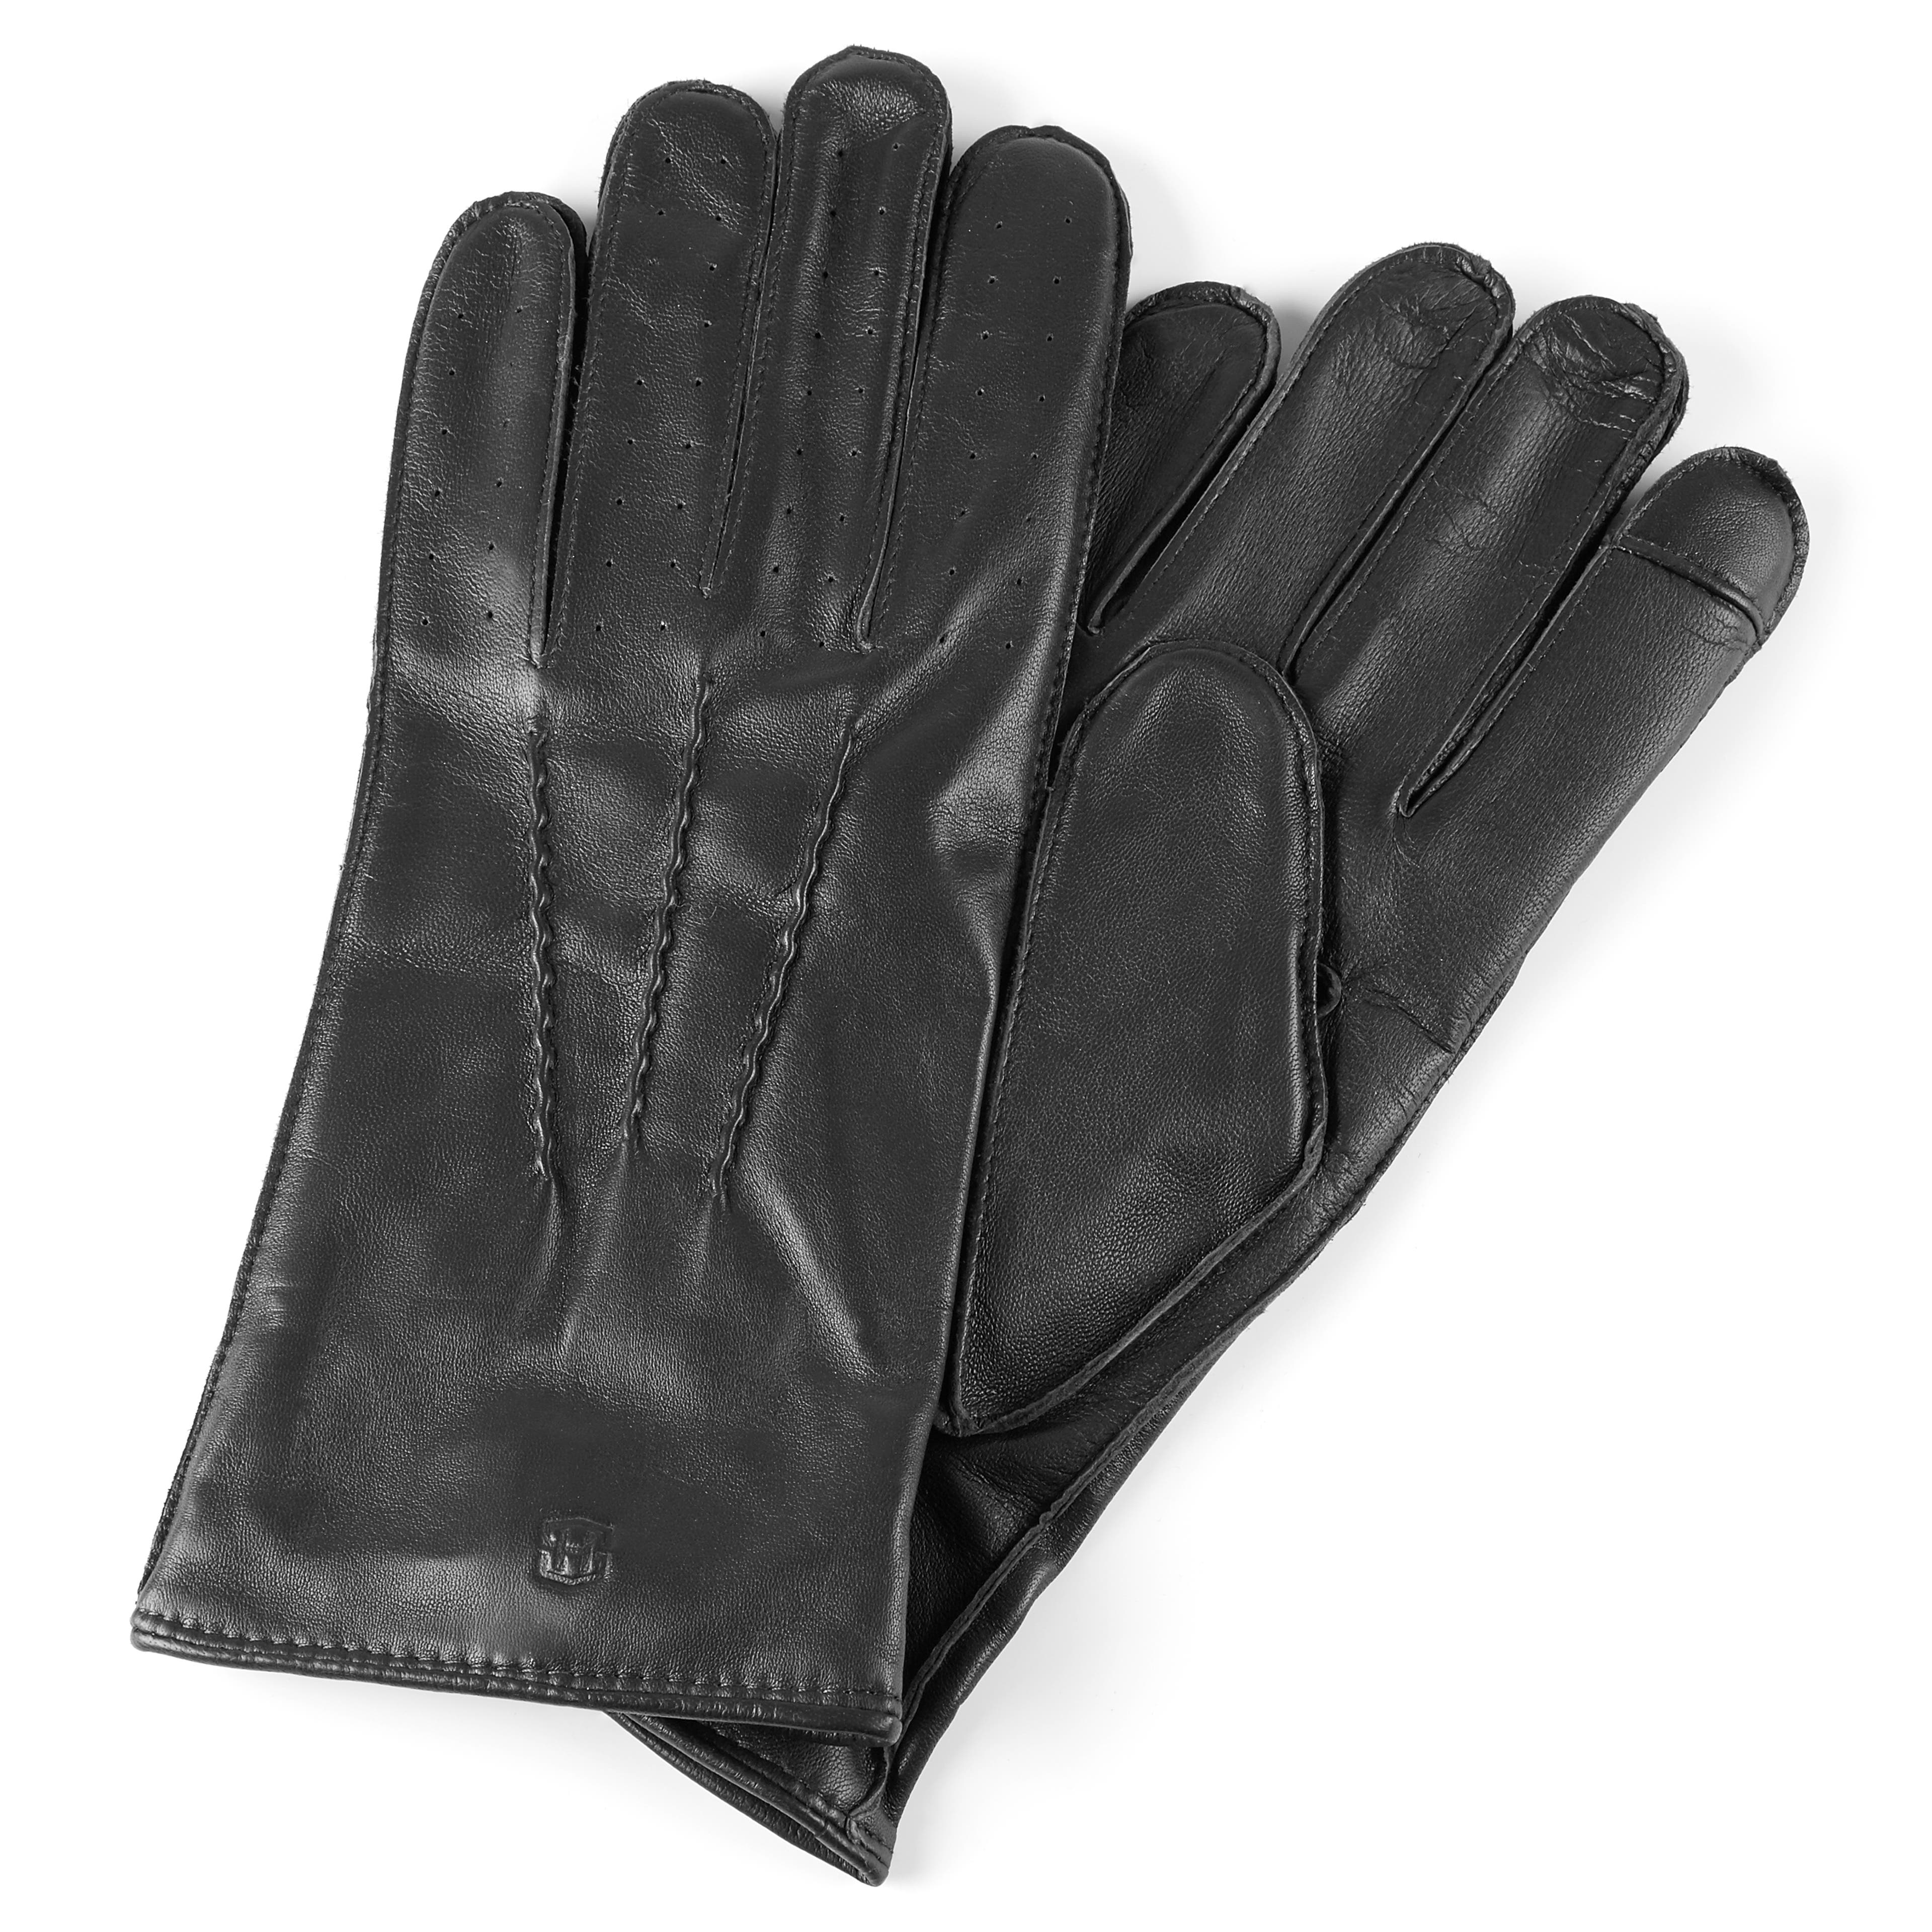 Cuffed Black Perforated Touchscreen Compatible Sheep leather Gloves